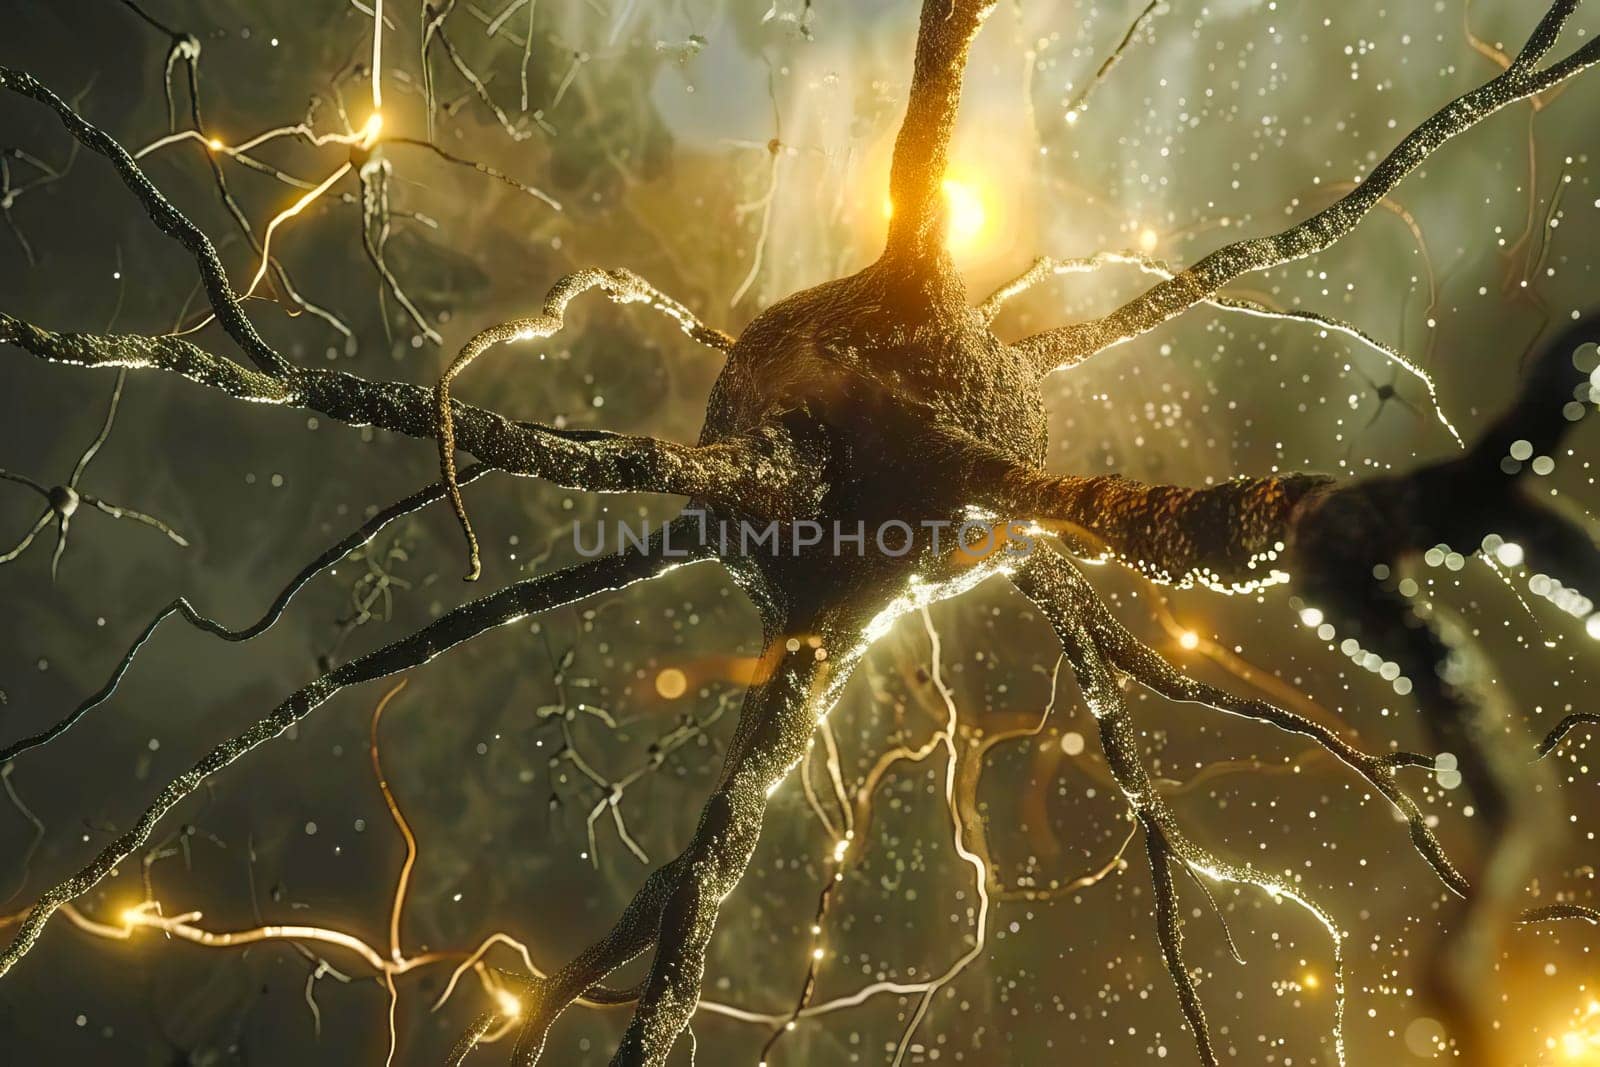 Neurons in action with synapses firing in the brain by vladimka